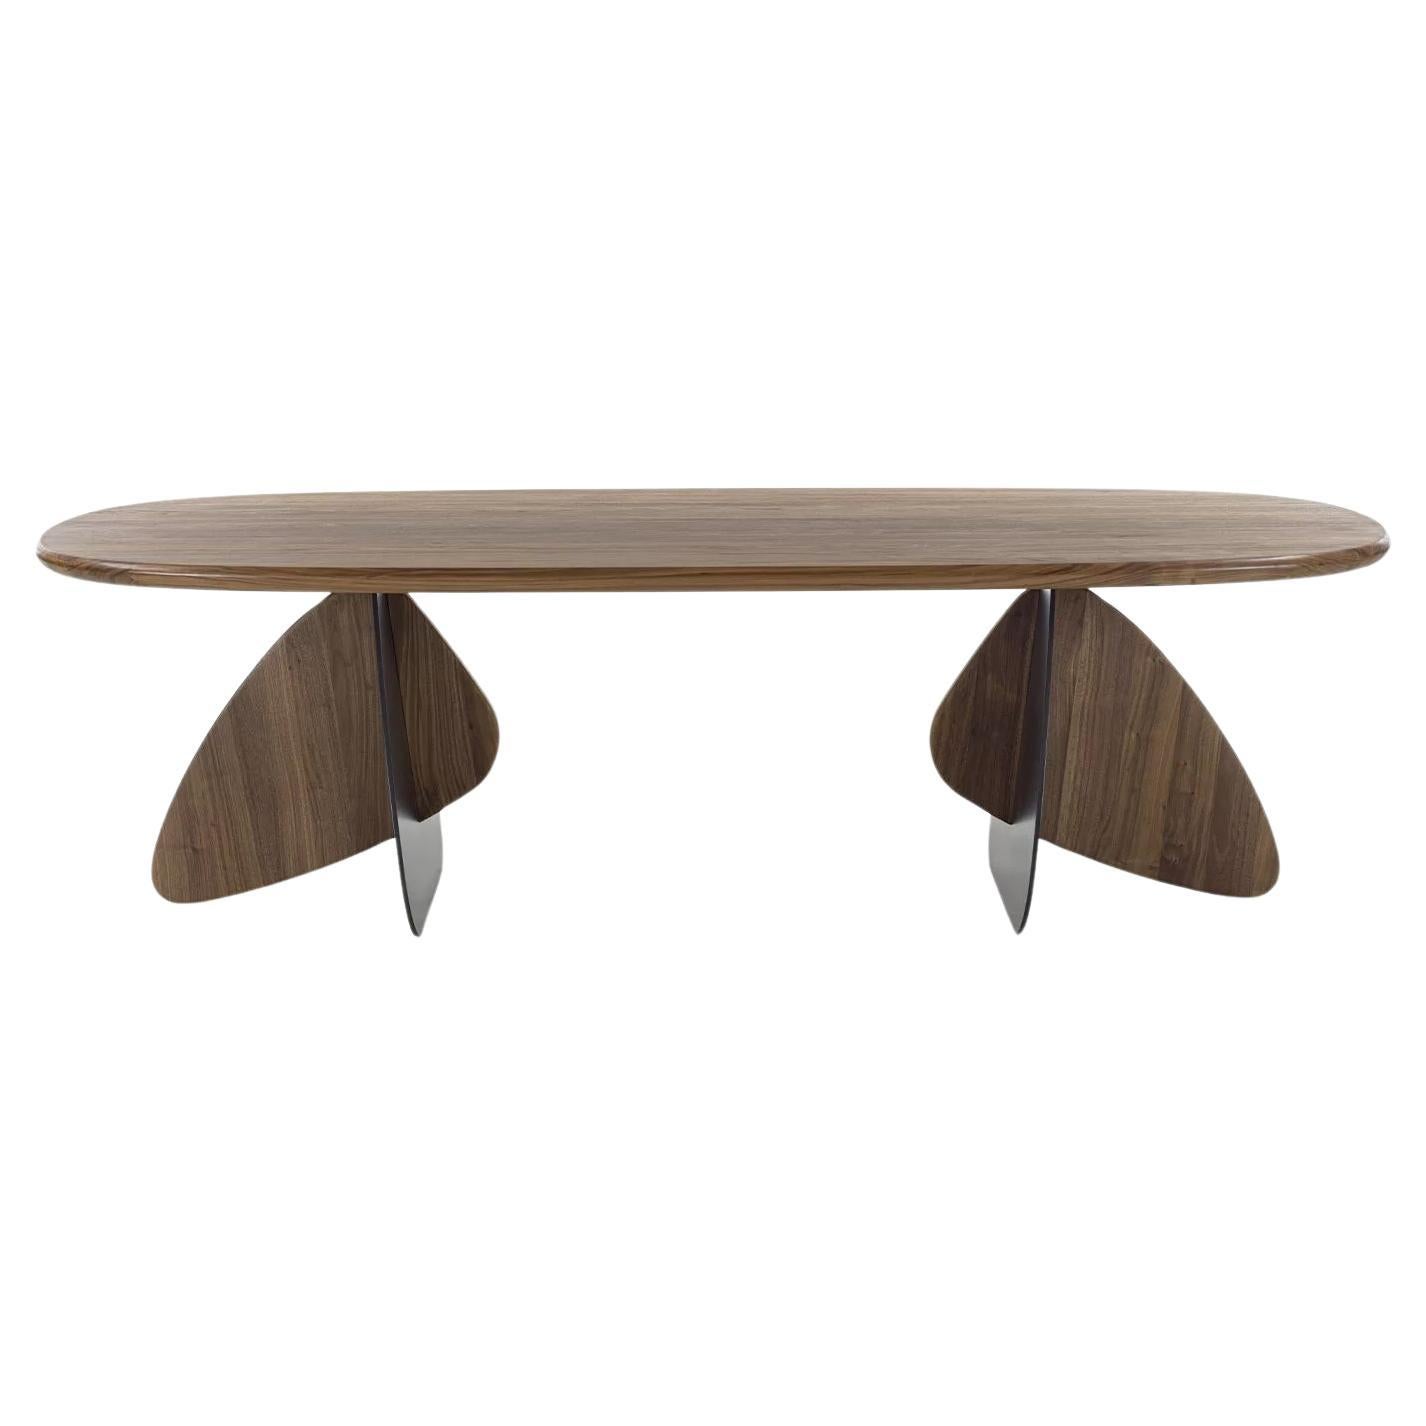 Cross Solid Wood & Iron Dining Table, Designed by Carlesi Tonelli, Made in Italy